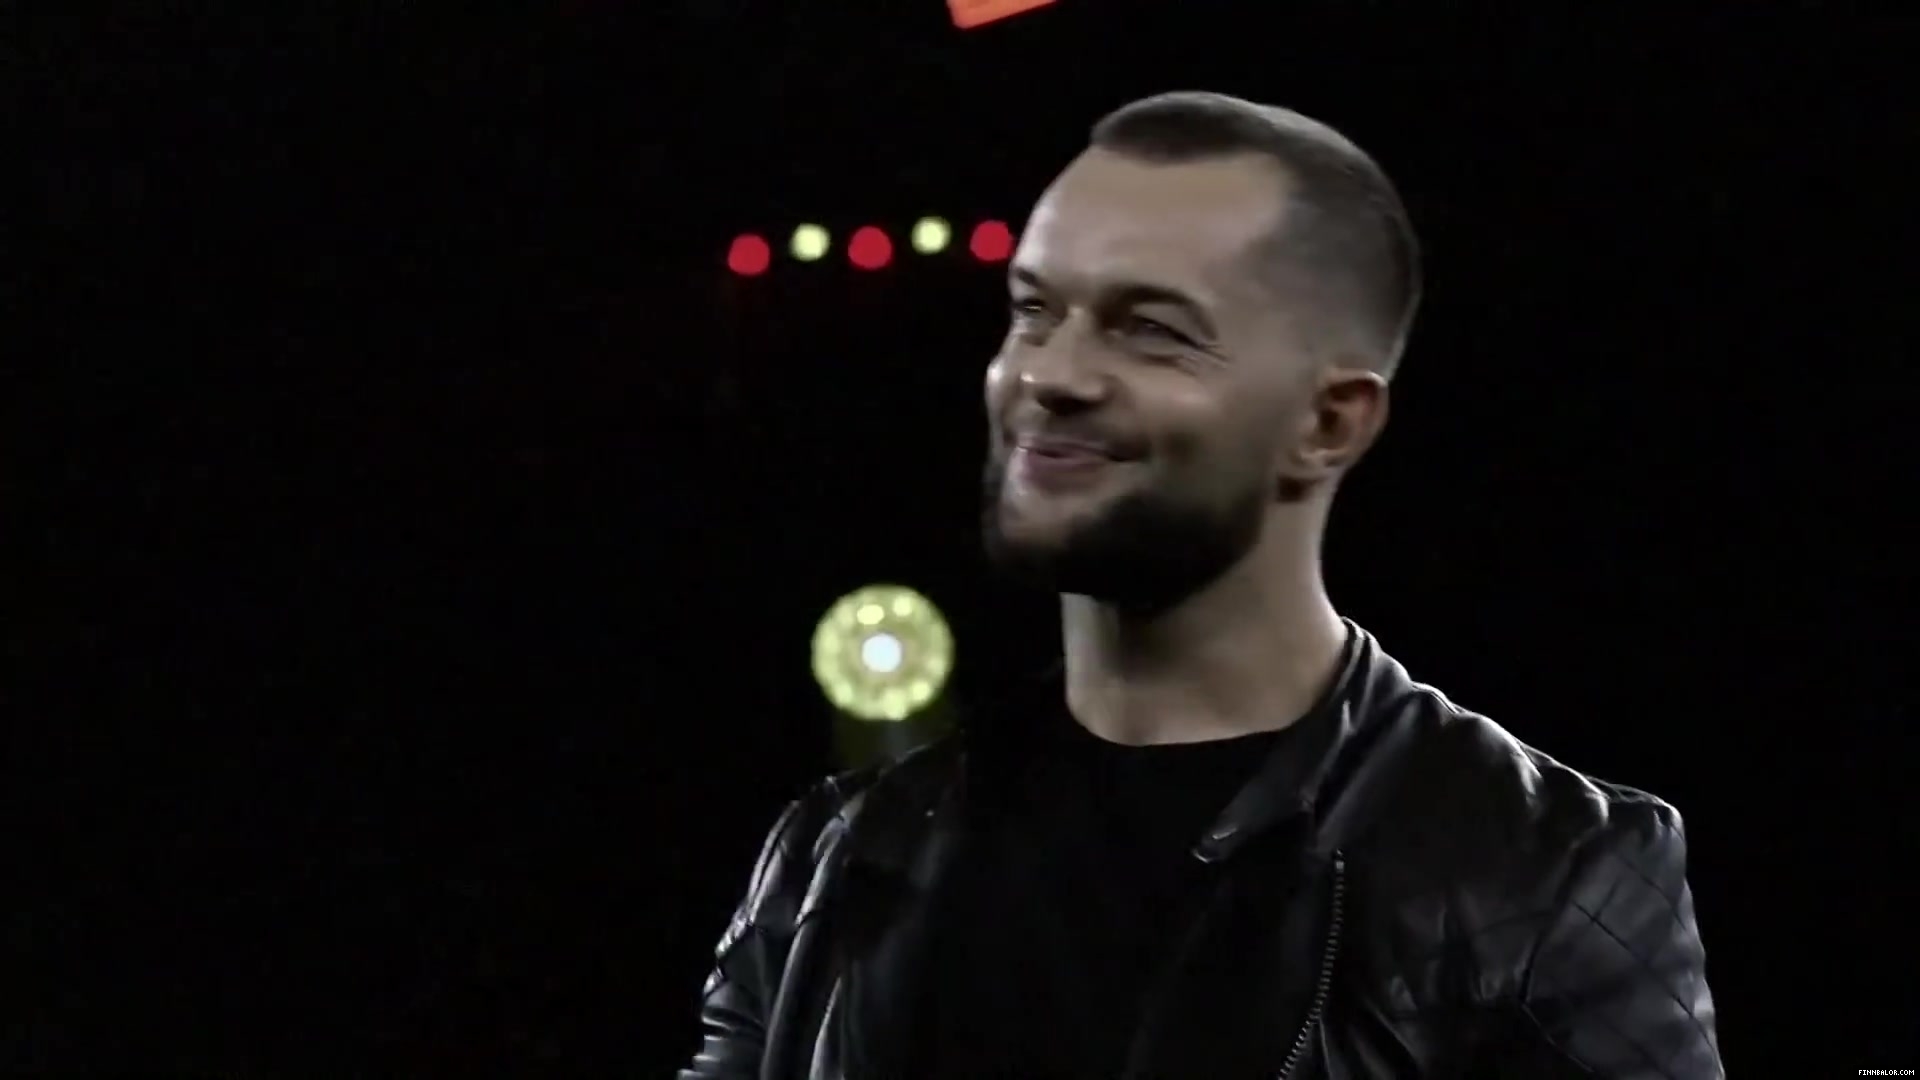 Finn_Balor___The_Rising_of_the_Prince_in_NXT_159.jpg